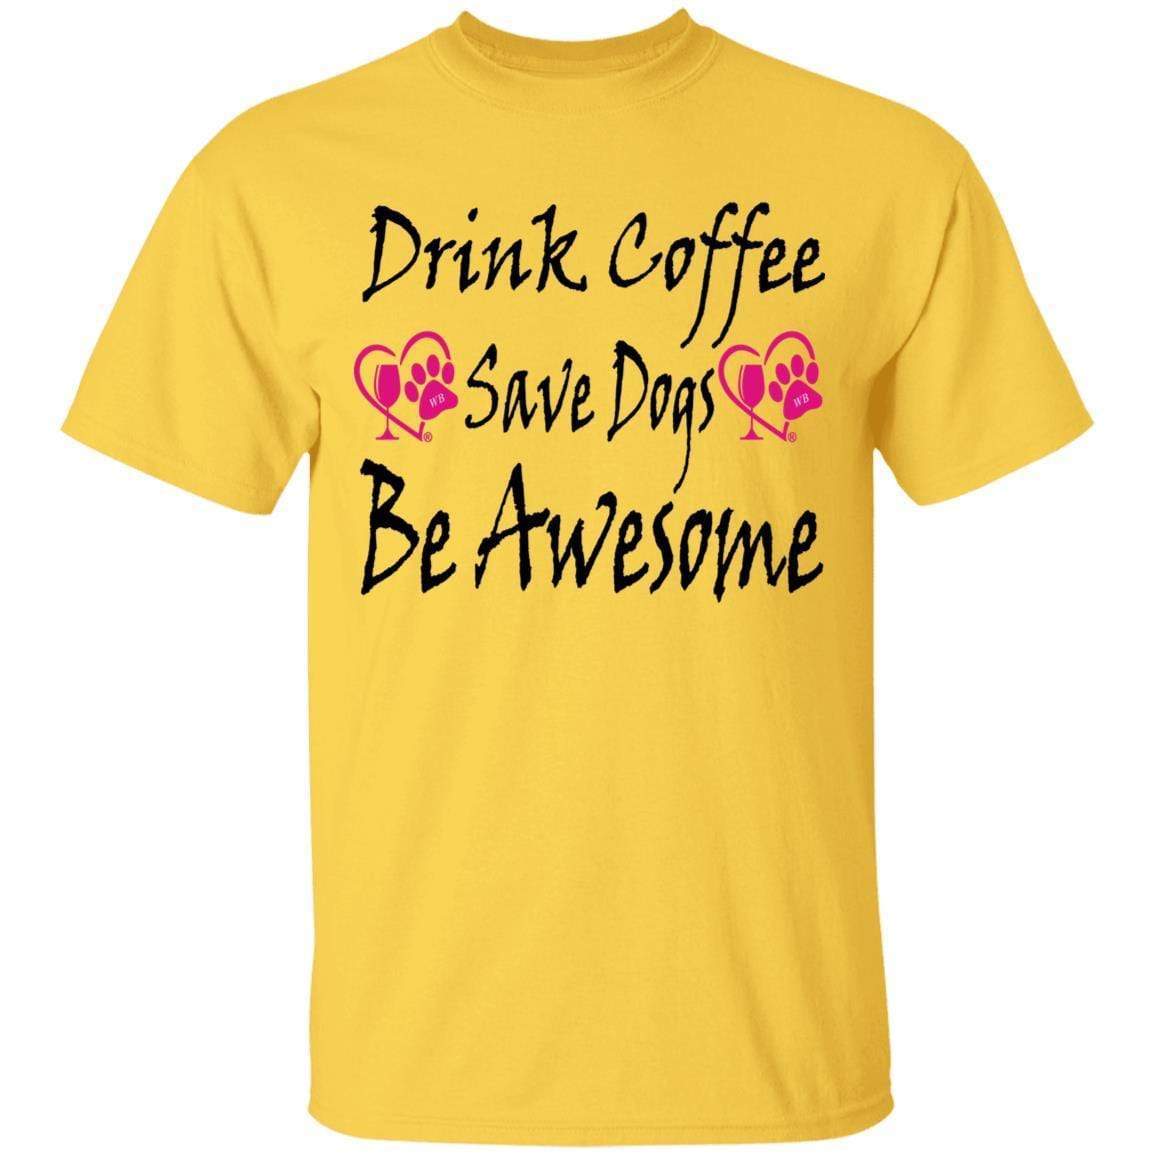 T-Shirts Daisy / S Winey Bitches Co "Drink Coffee Save Dogs Be Awesome" 5.3 oz. T-Shirt WineyBitchesCo